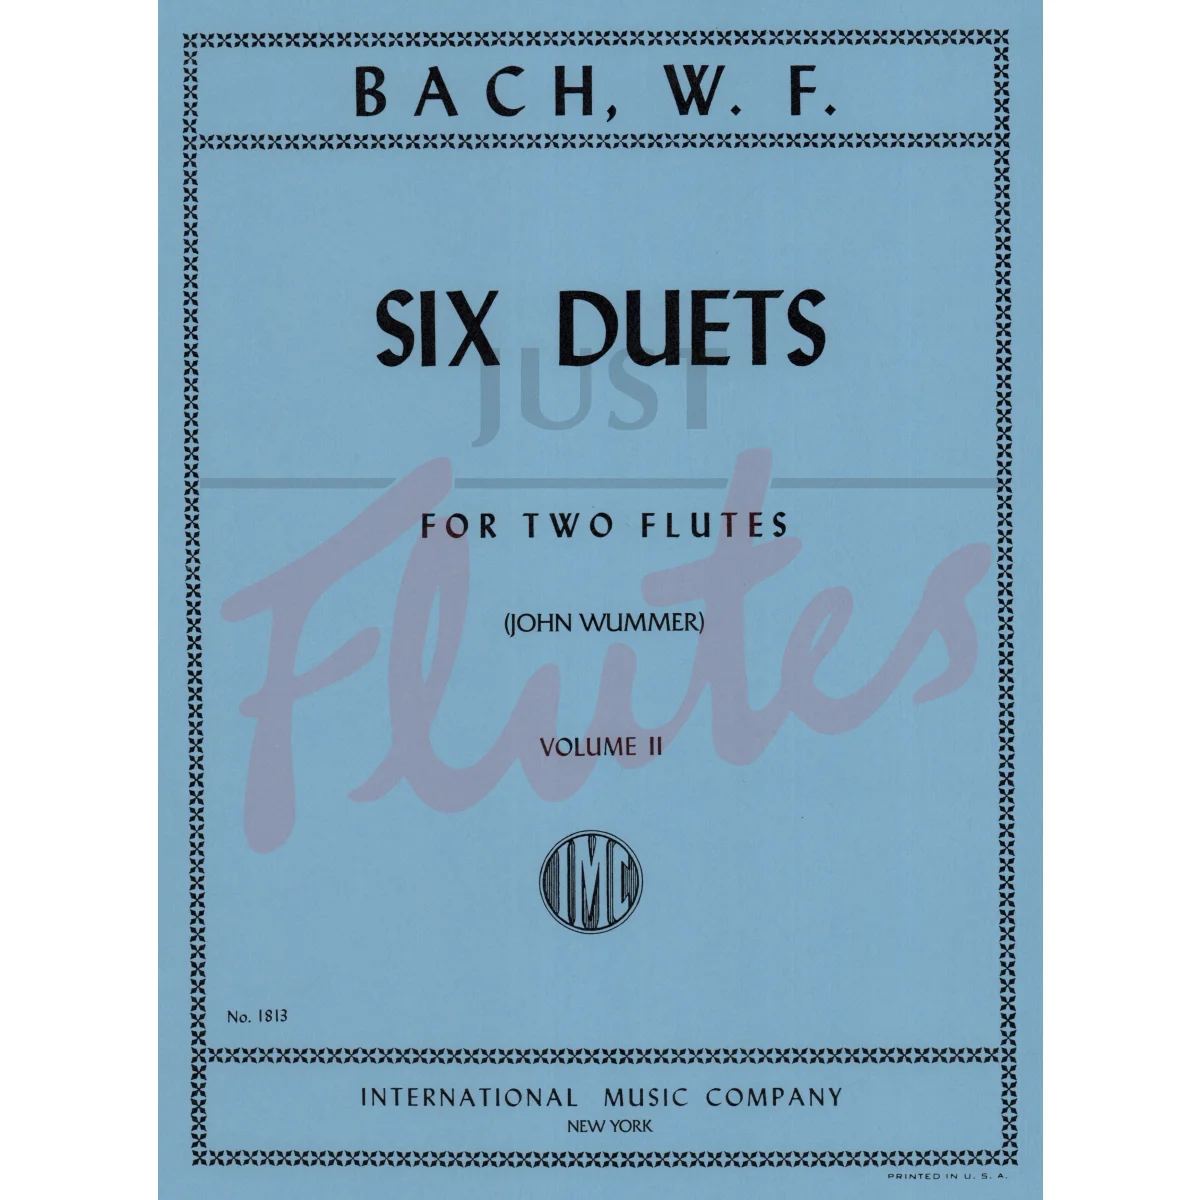 Six Duets for Two Flutes, Volume 2